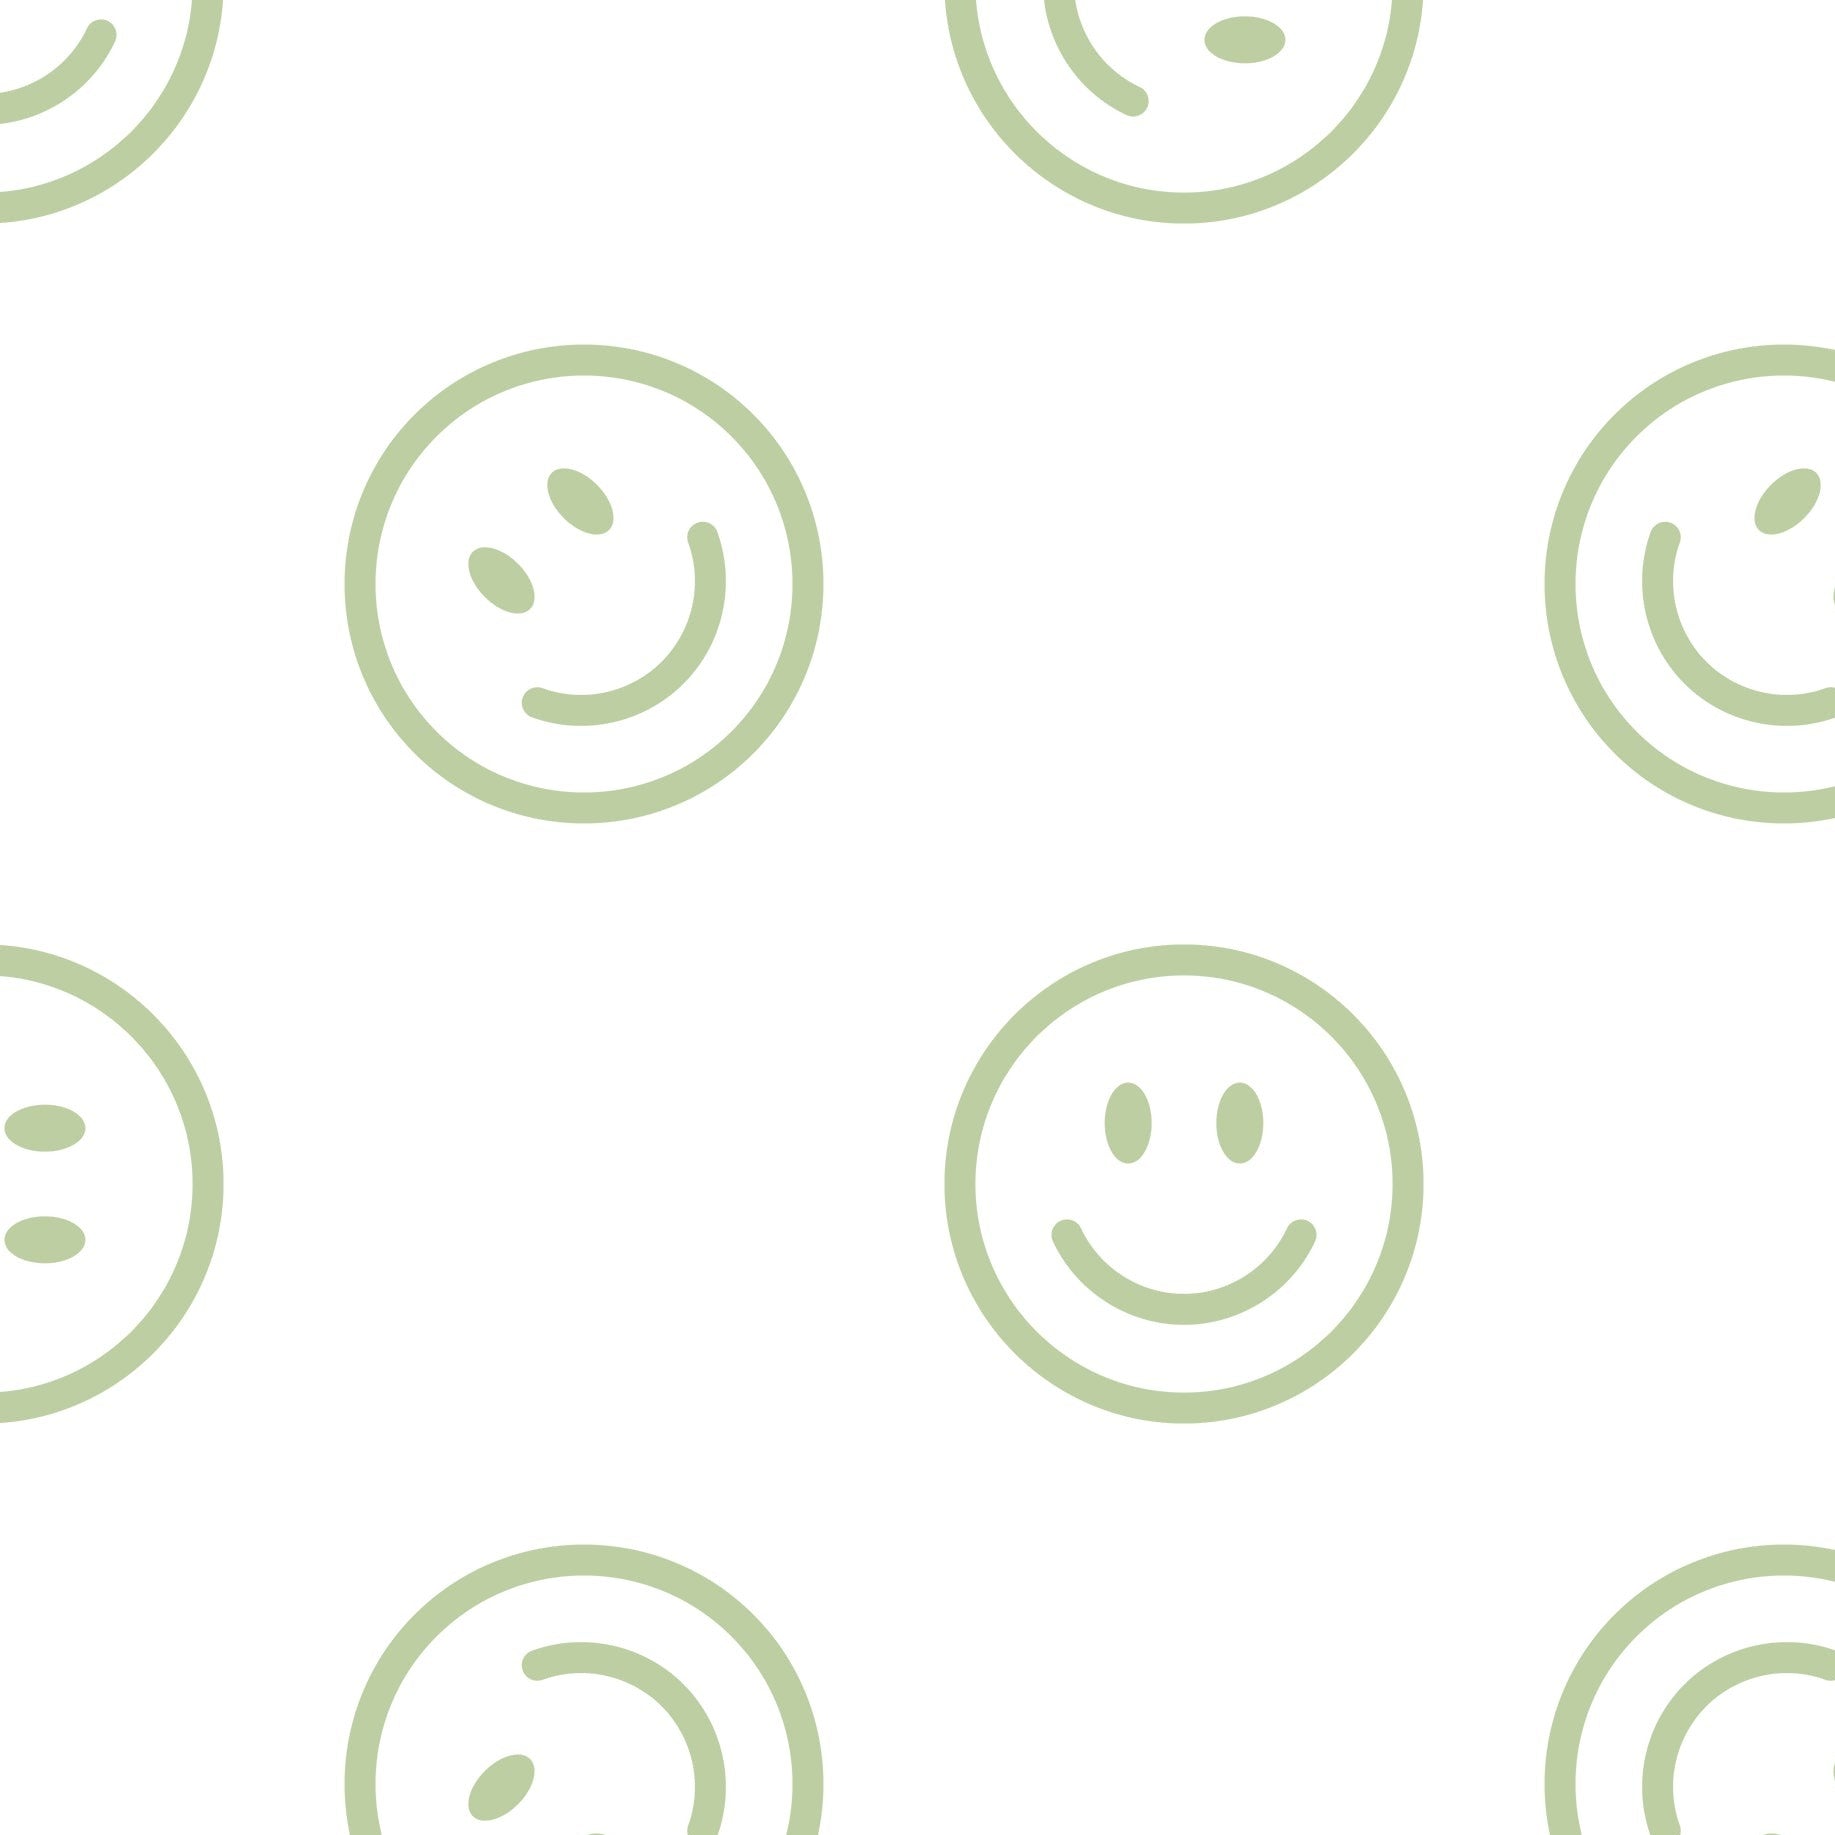 Close-up view of Smiley Wallpaper with a playful pattern of green smiley faces on a light background, providing a clear look at the design